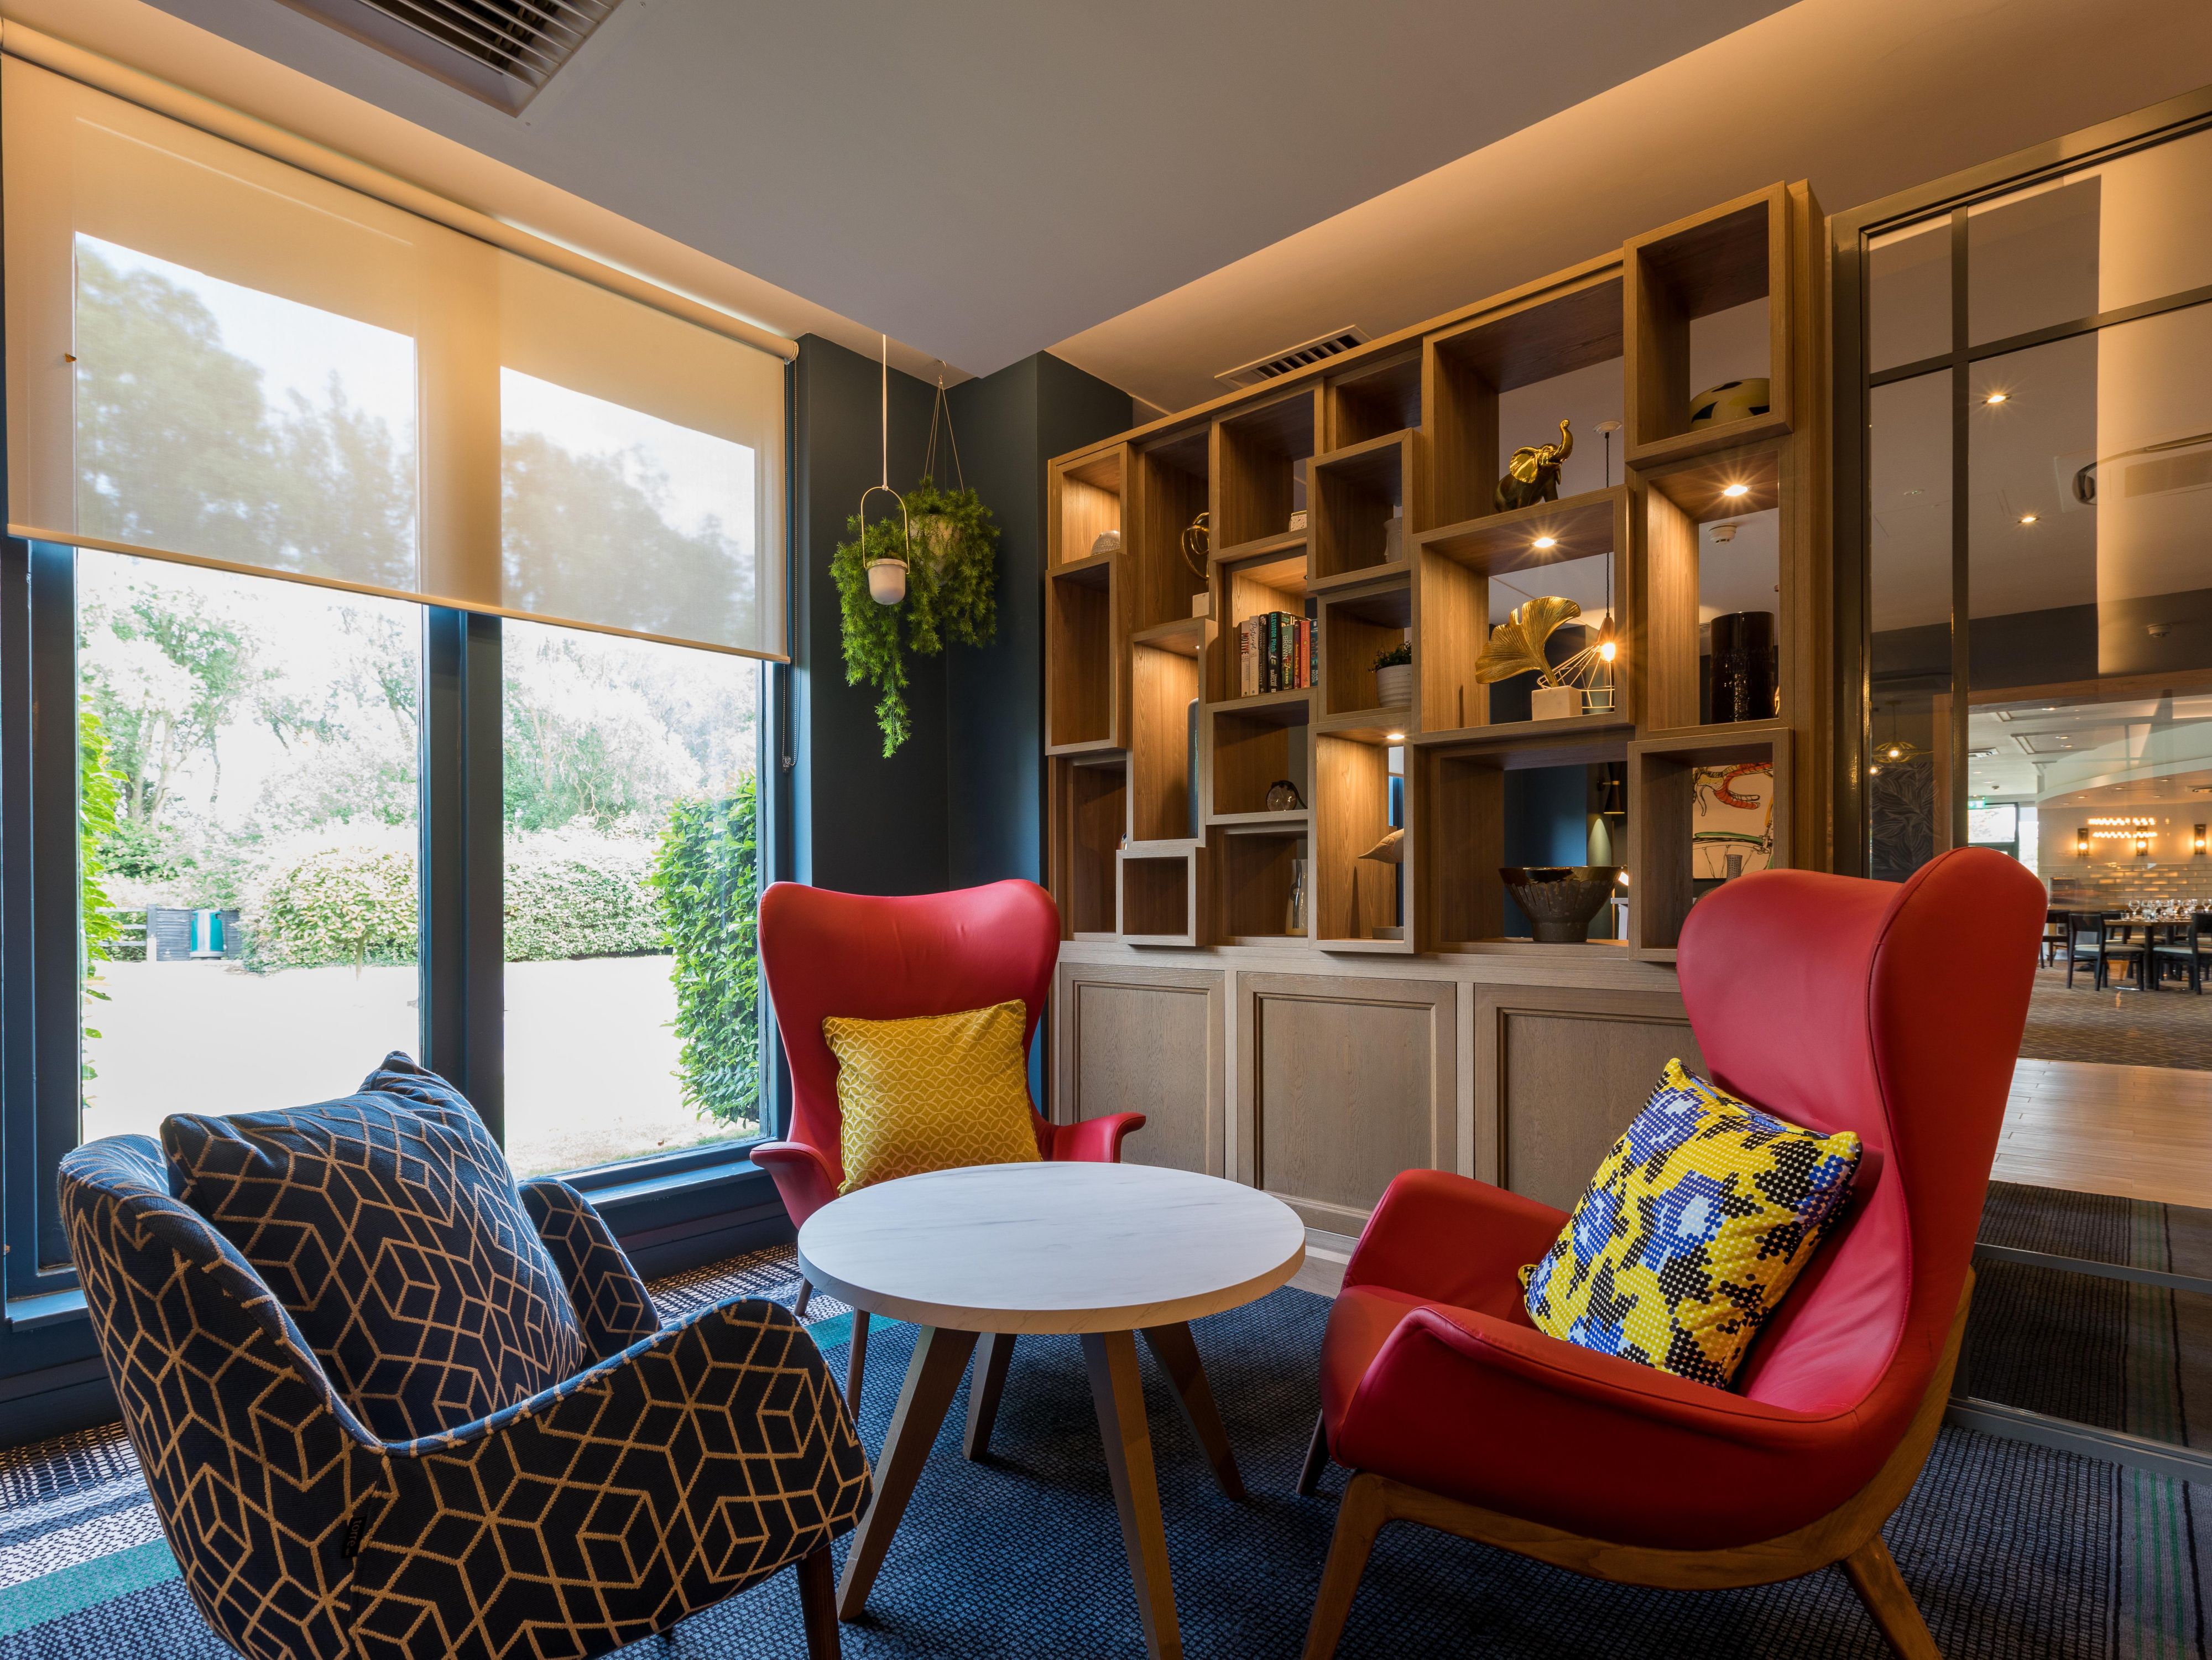 The Open Lobby combines the front desk, lobby, bar, lounge, restaurant and business centre into one flexible, open space, allowing our guests to use the space to meet their requirements throughout their visit, whether that's to work, relax, eat and drink or socialise.